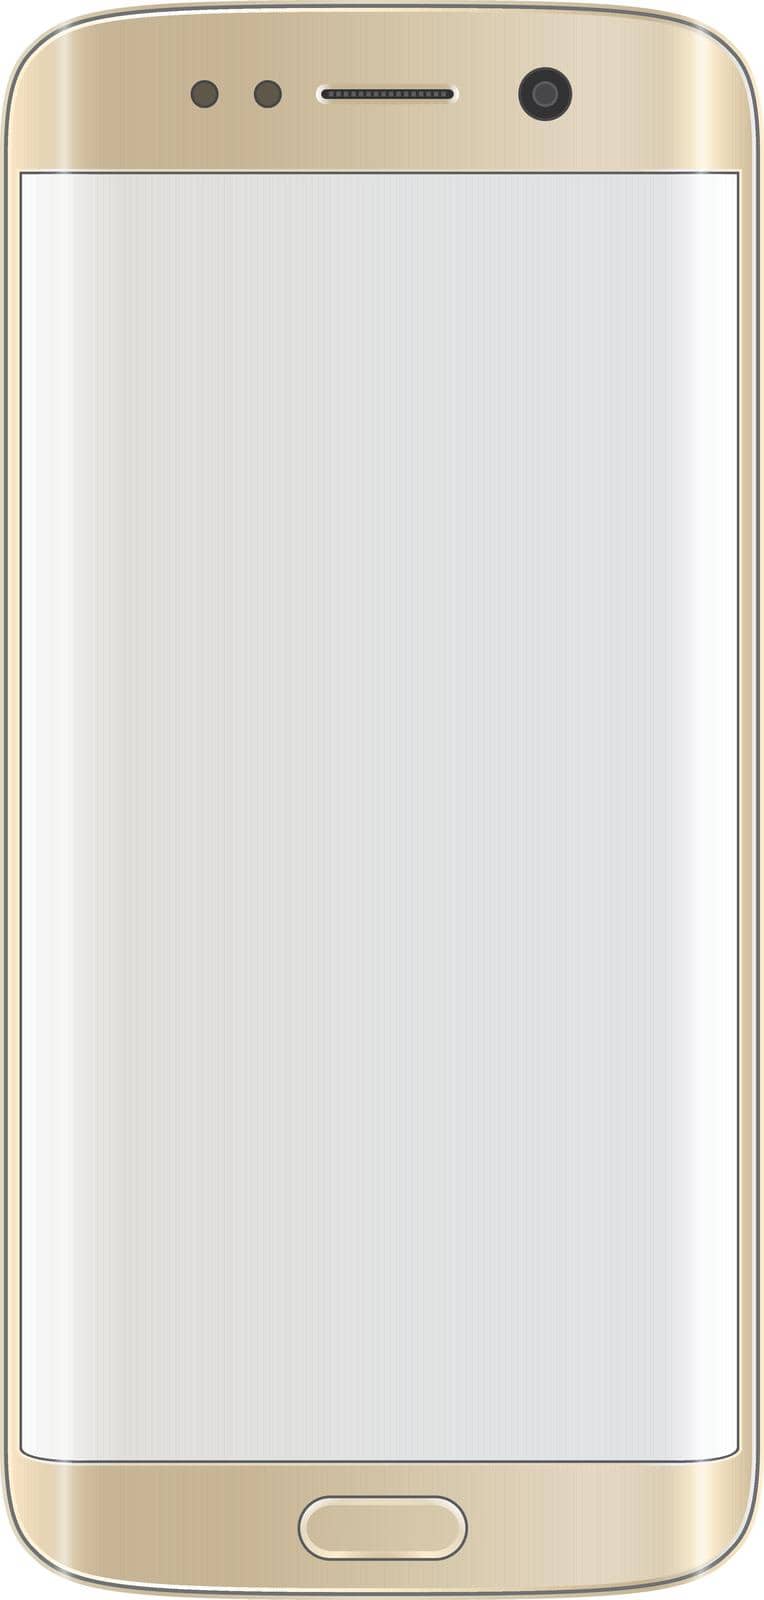 Smartphone with edge display design. Gold platinum color with blank white display.